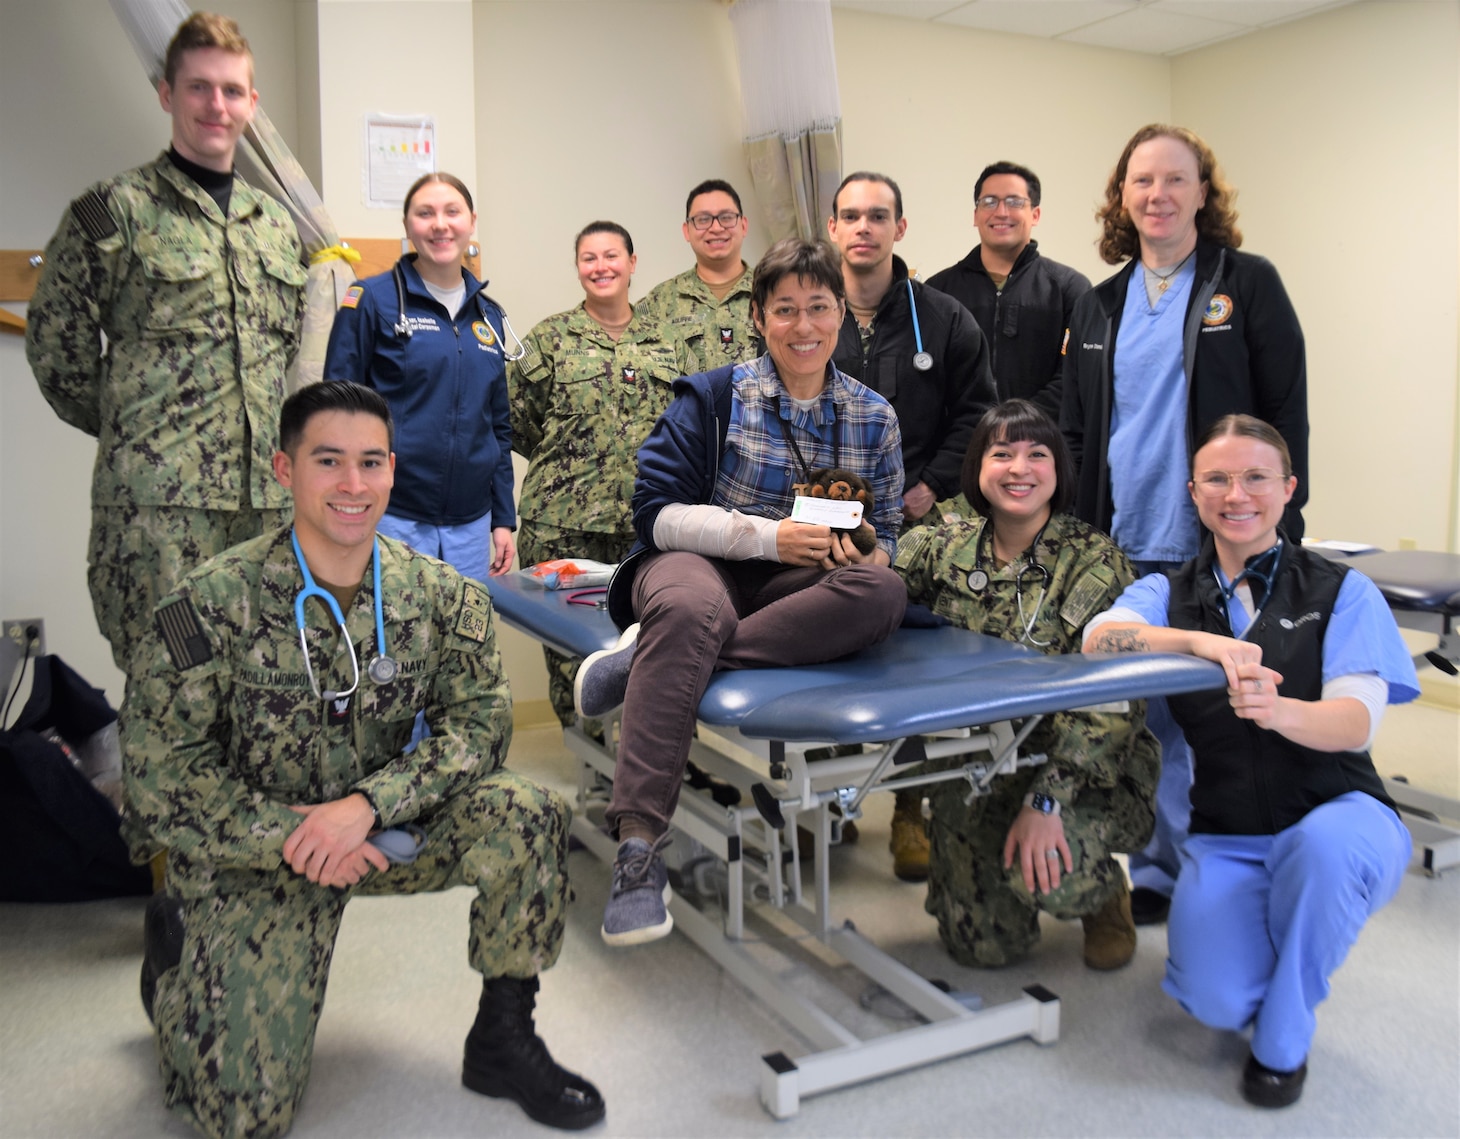 Caring for one of their own…Naval Hospital Bremerton Pediatrics department staff flank Dr. Victoria Crescenzi after providing her mock patient care while she posed as a simulated injured casualty during a mass casualty drill designed to test response efforts, held Nov. 14, 2023. (official Navy photo by Douglas H Stutz, NHB/NMRTC Bremerton public affairs officer).